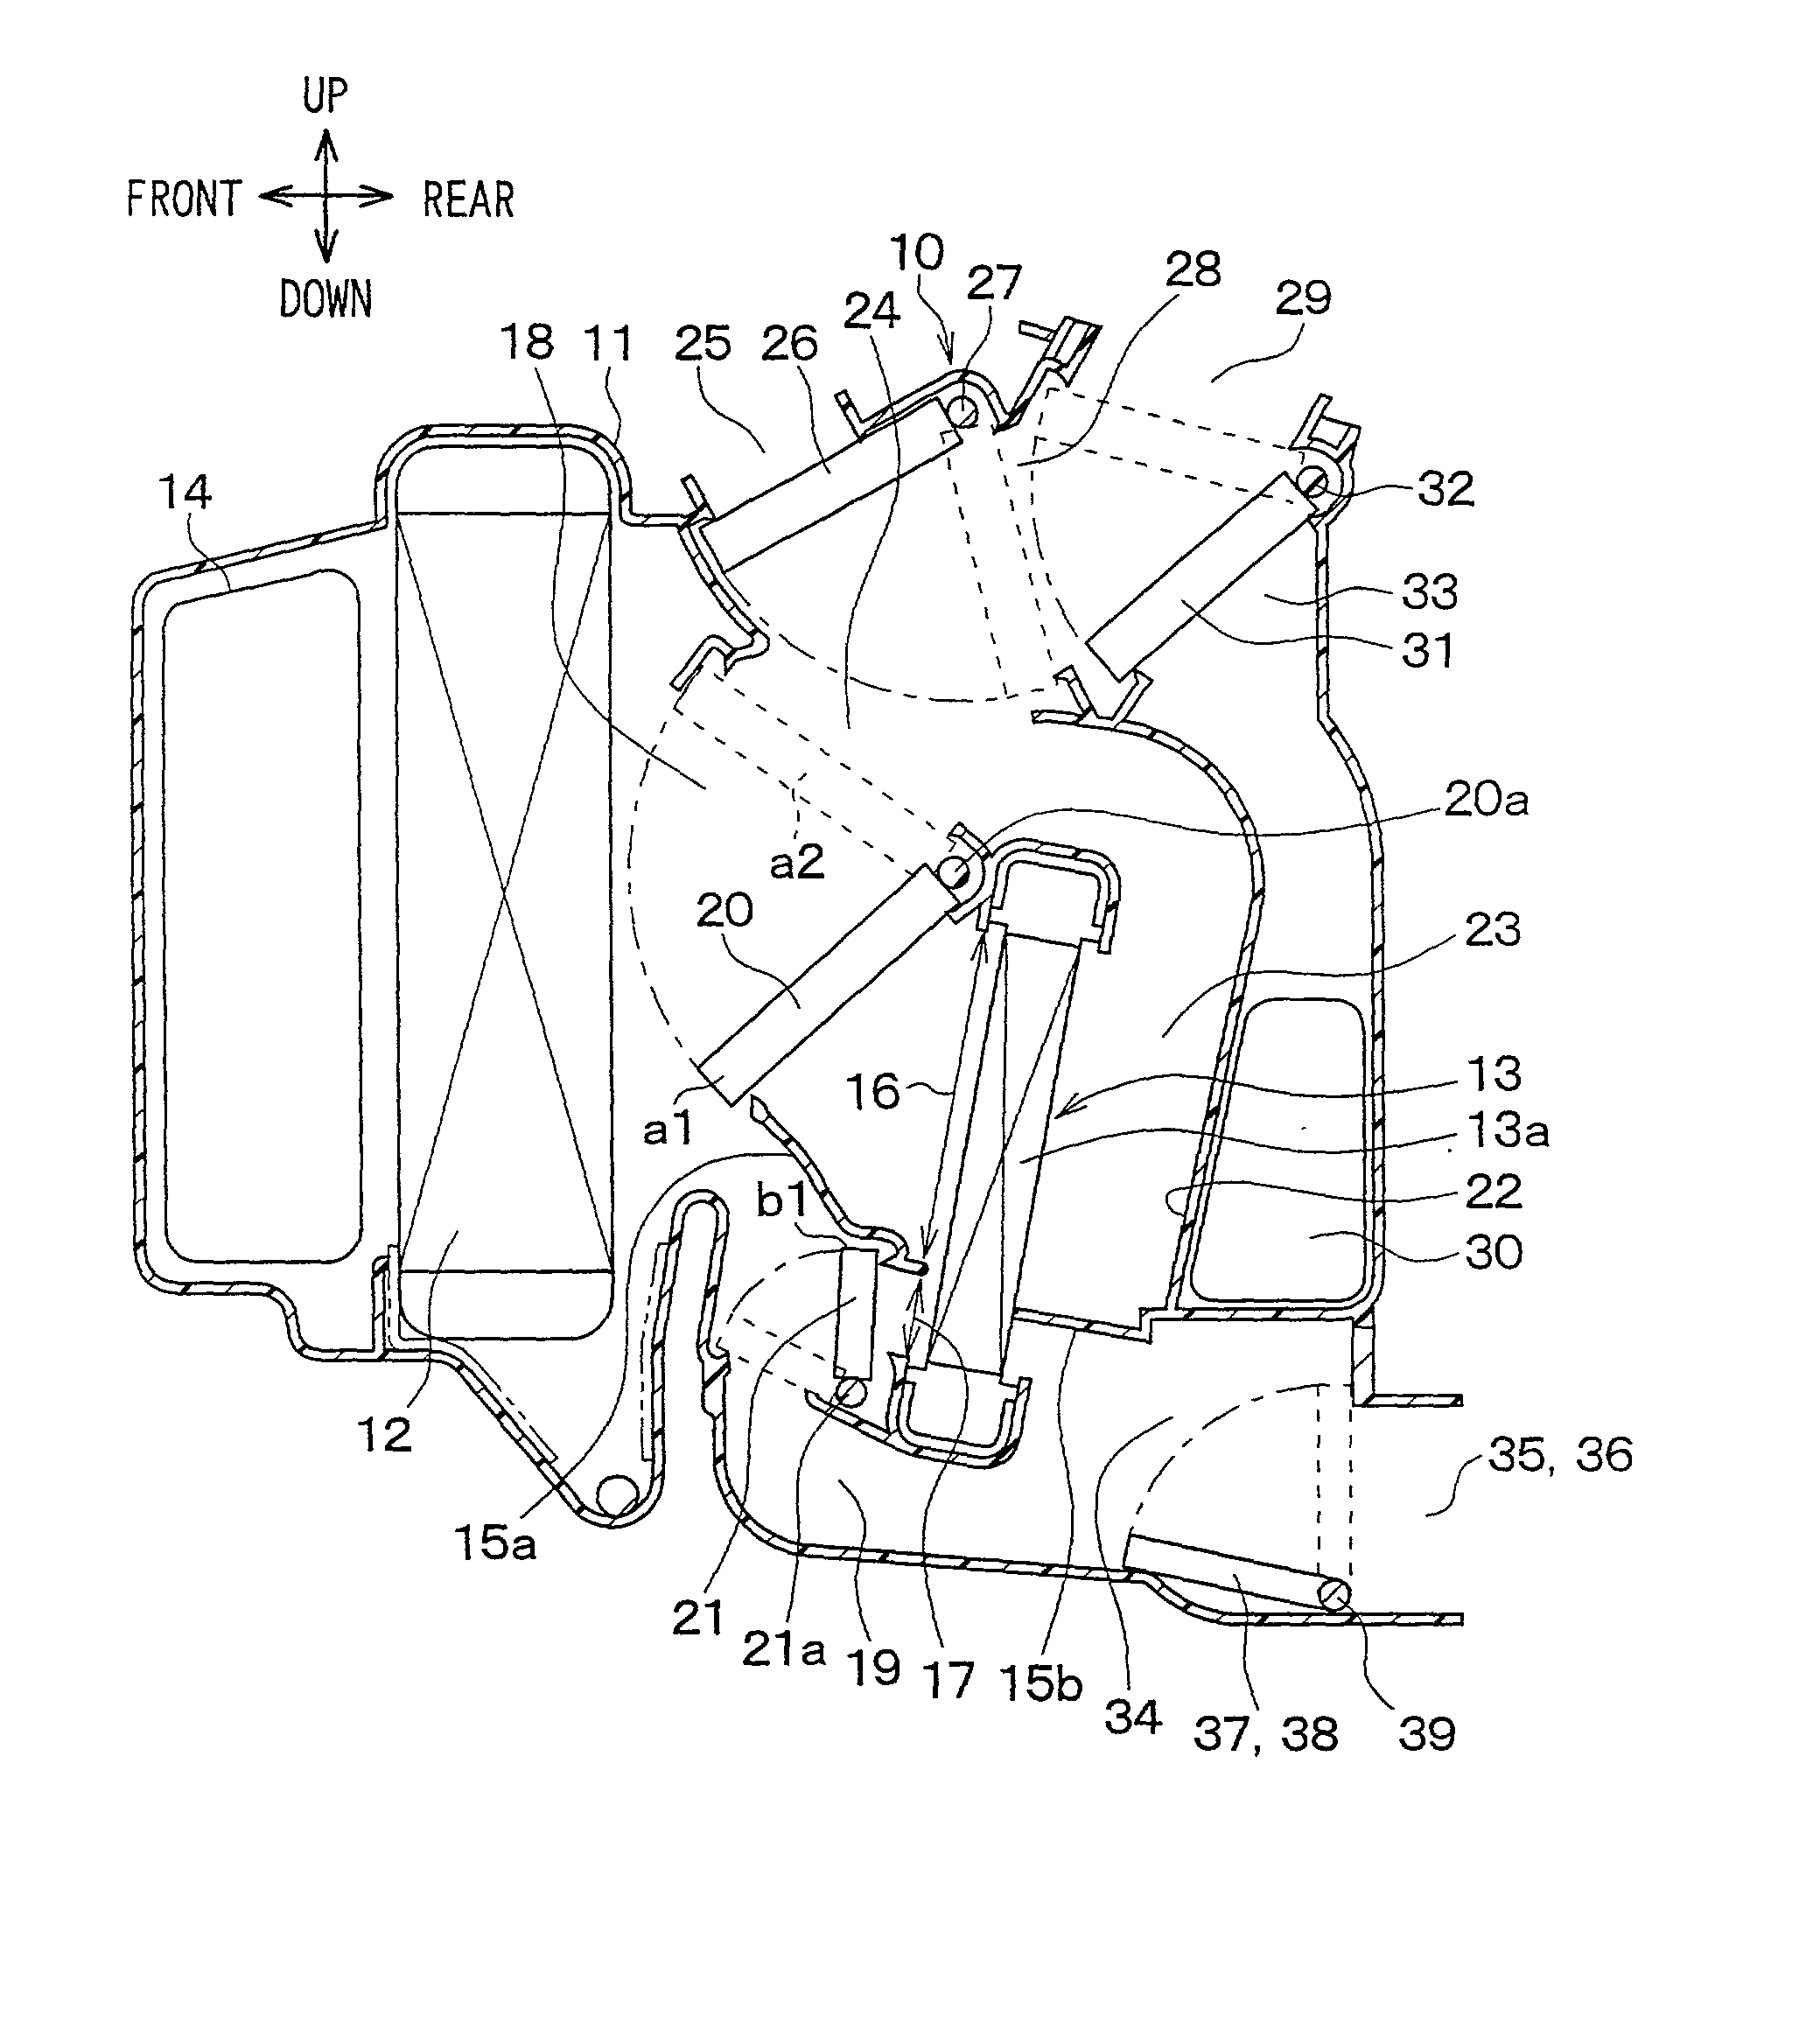 Vehicle air conditioner with front air passage and rear air passage